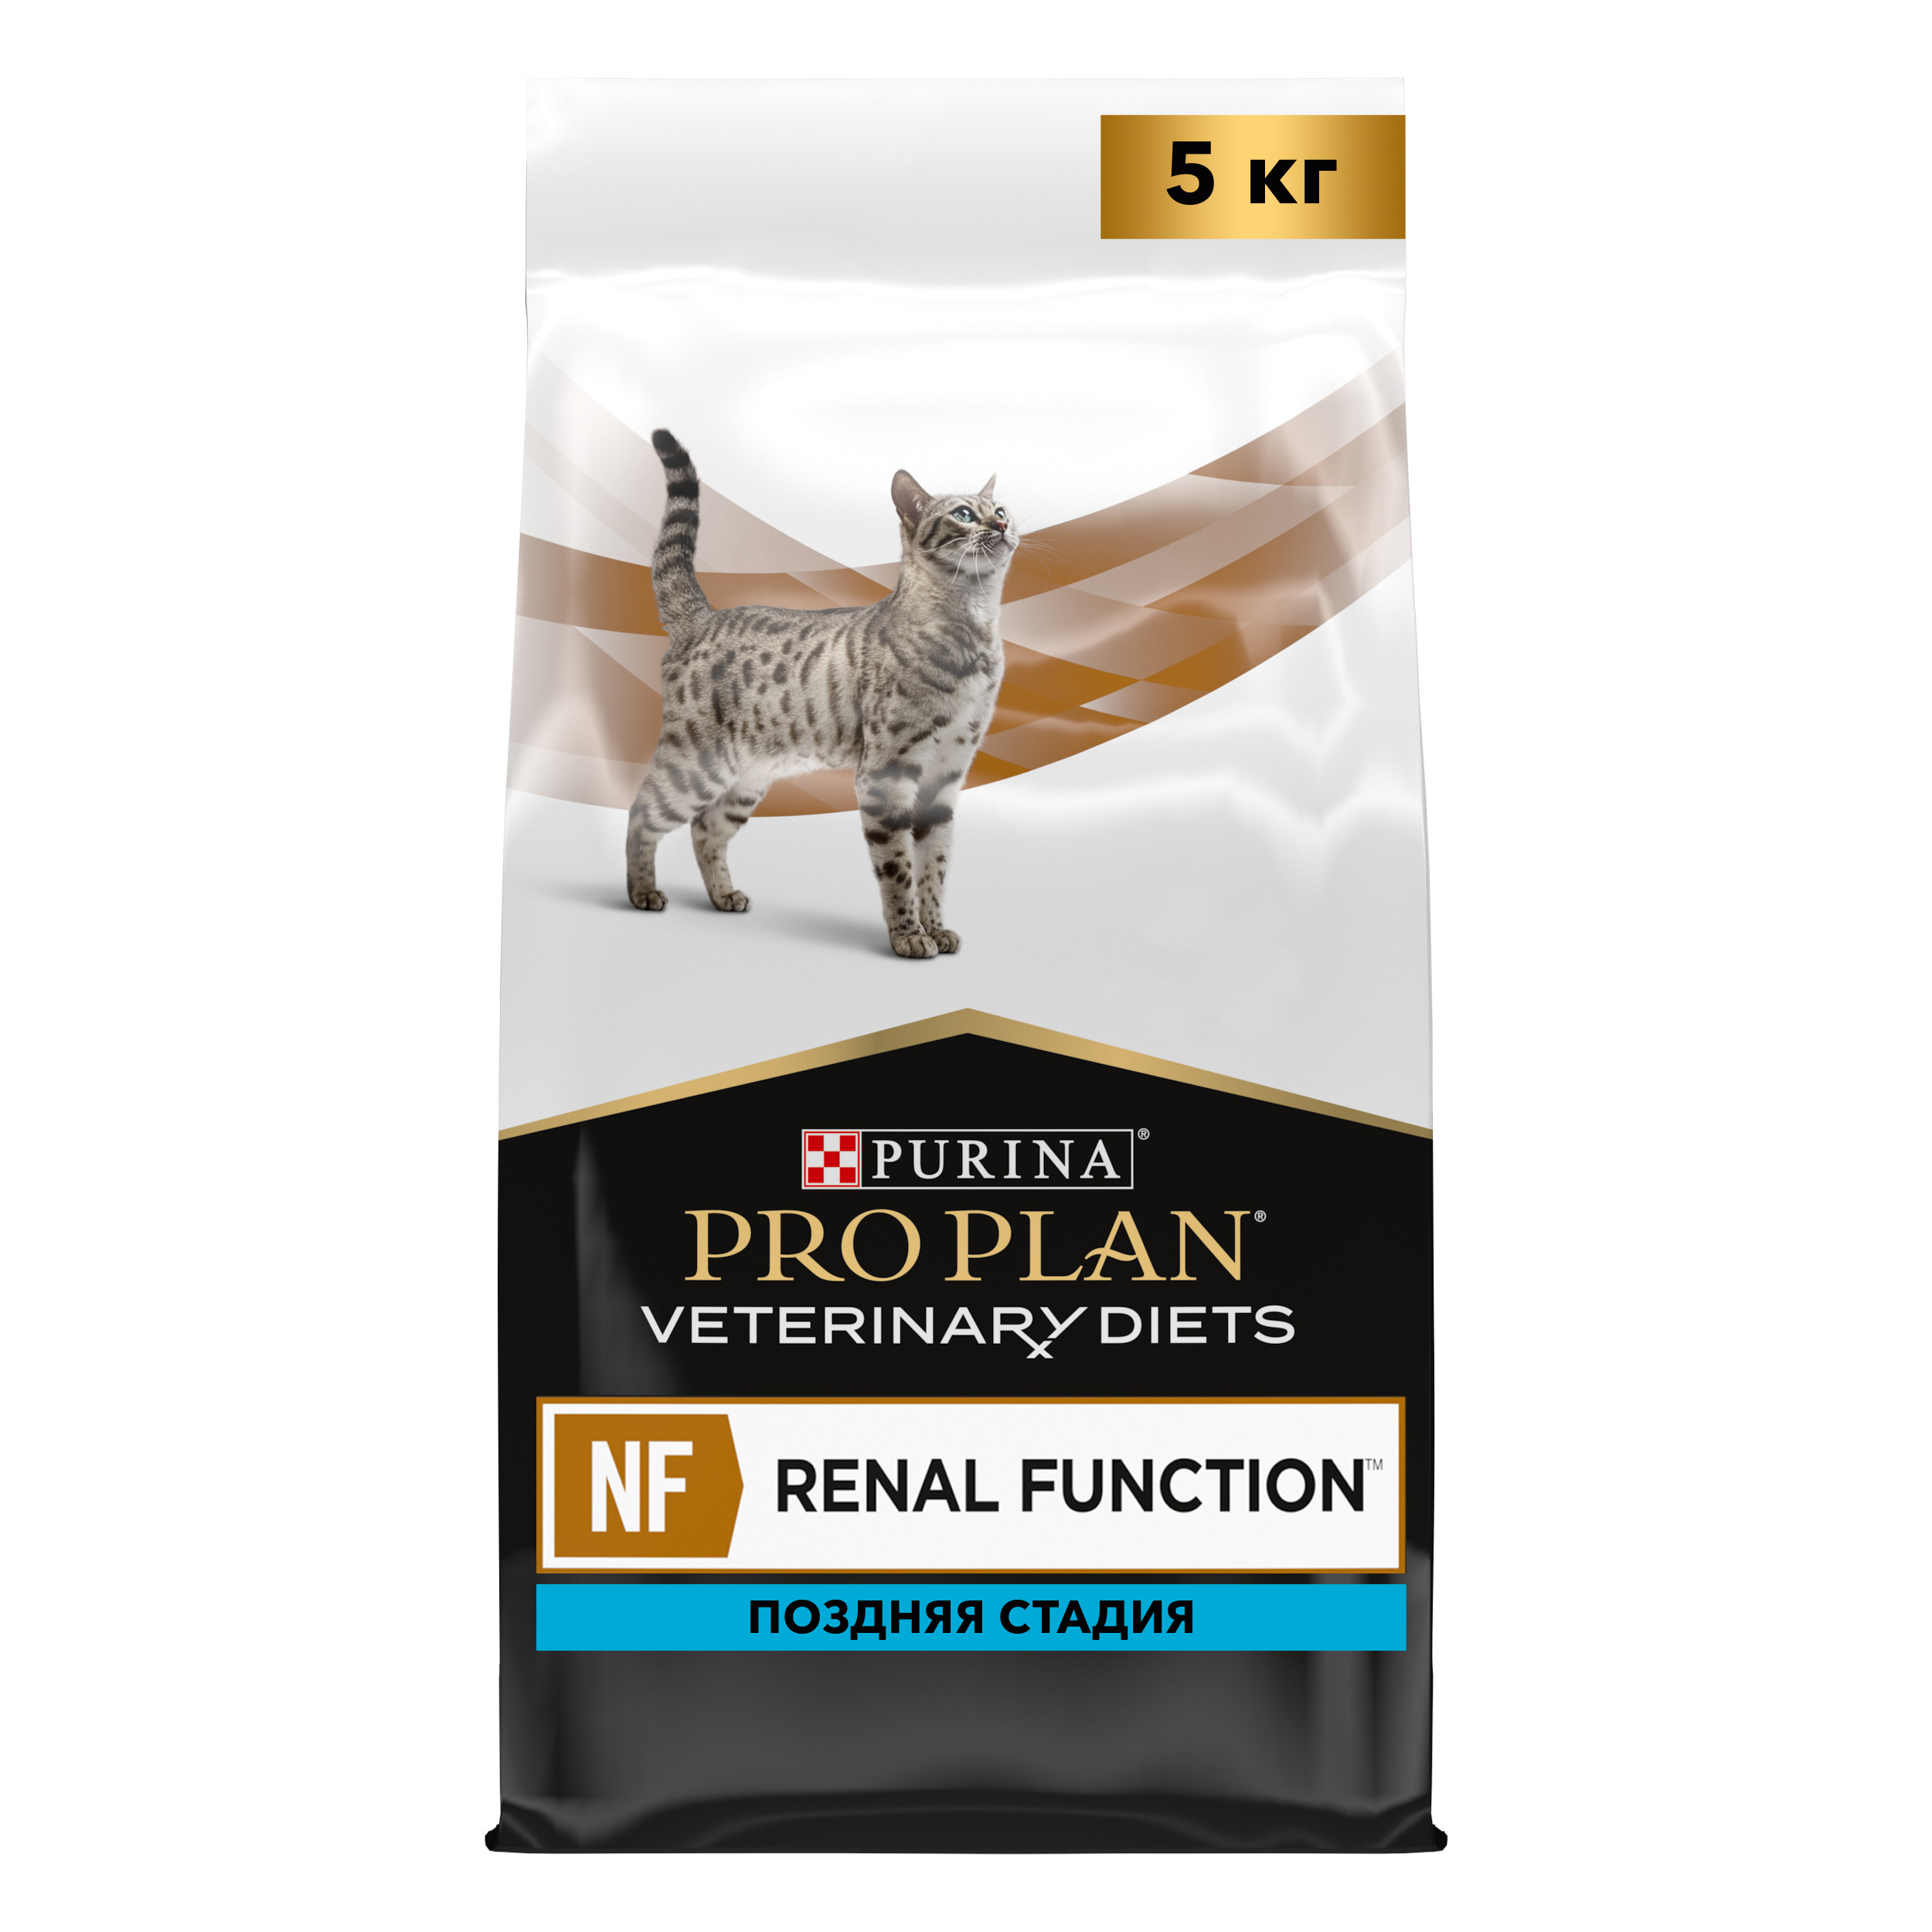 Purina Pro Plan renal function Advanced Care. Pro Plan vet renal NF early Care для кошек. Purina Pro Plan renal function для кошек. Pro Plan Veterinary Diets NF renal function. Pro plan veterinary renal для кошек